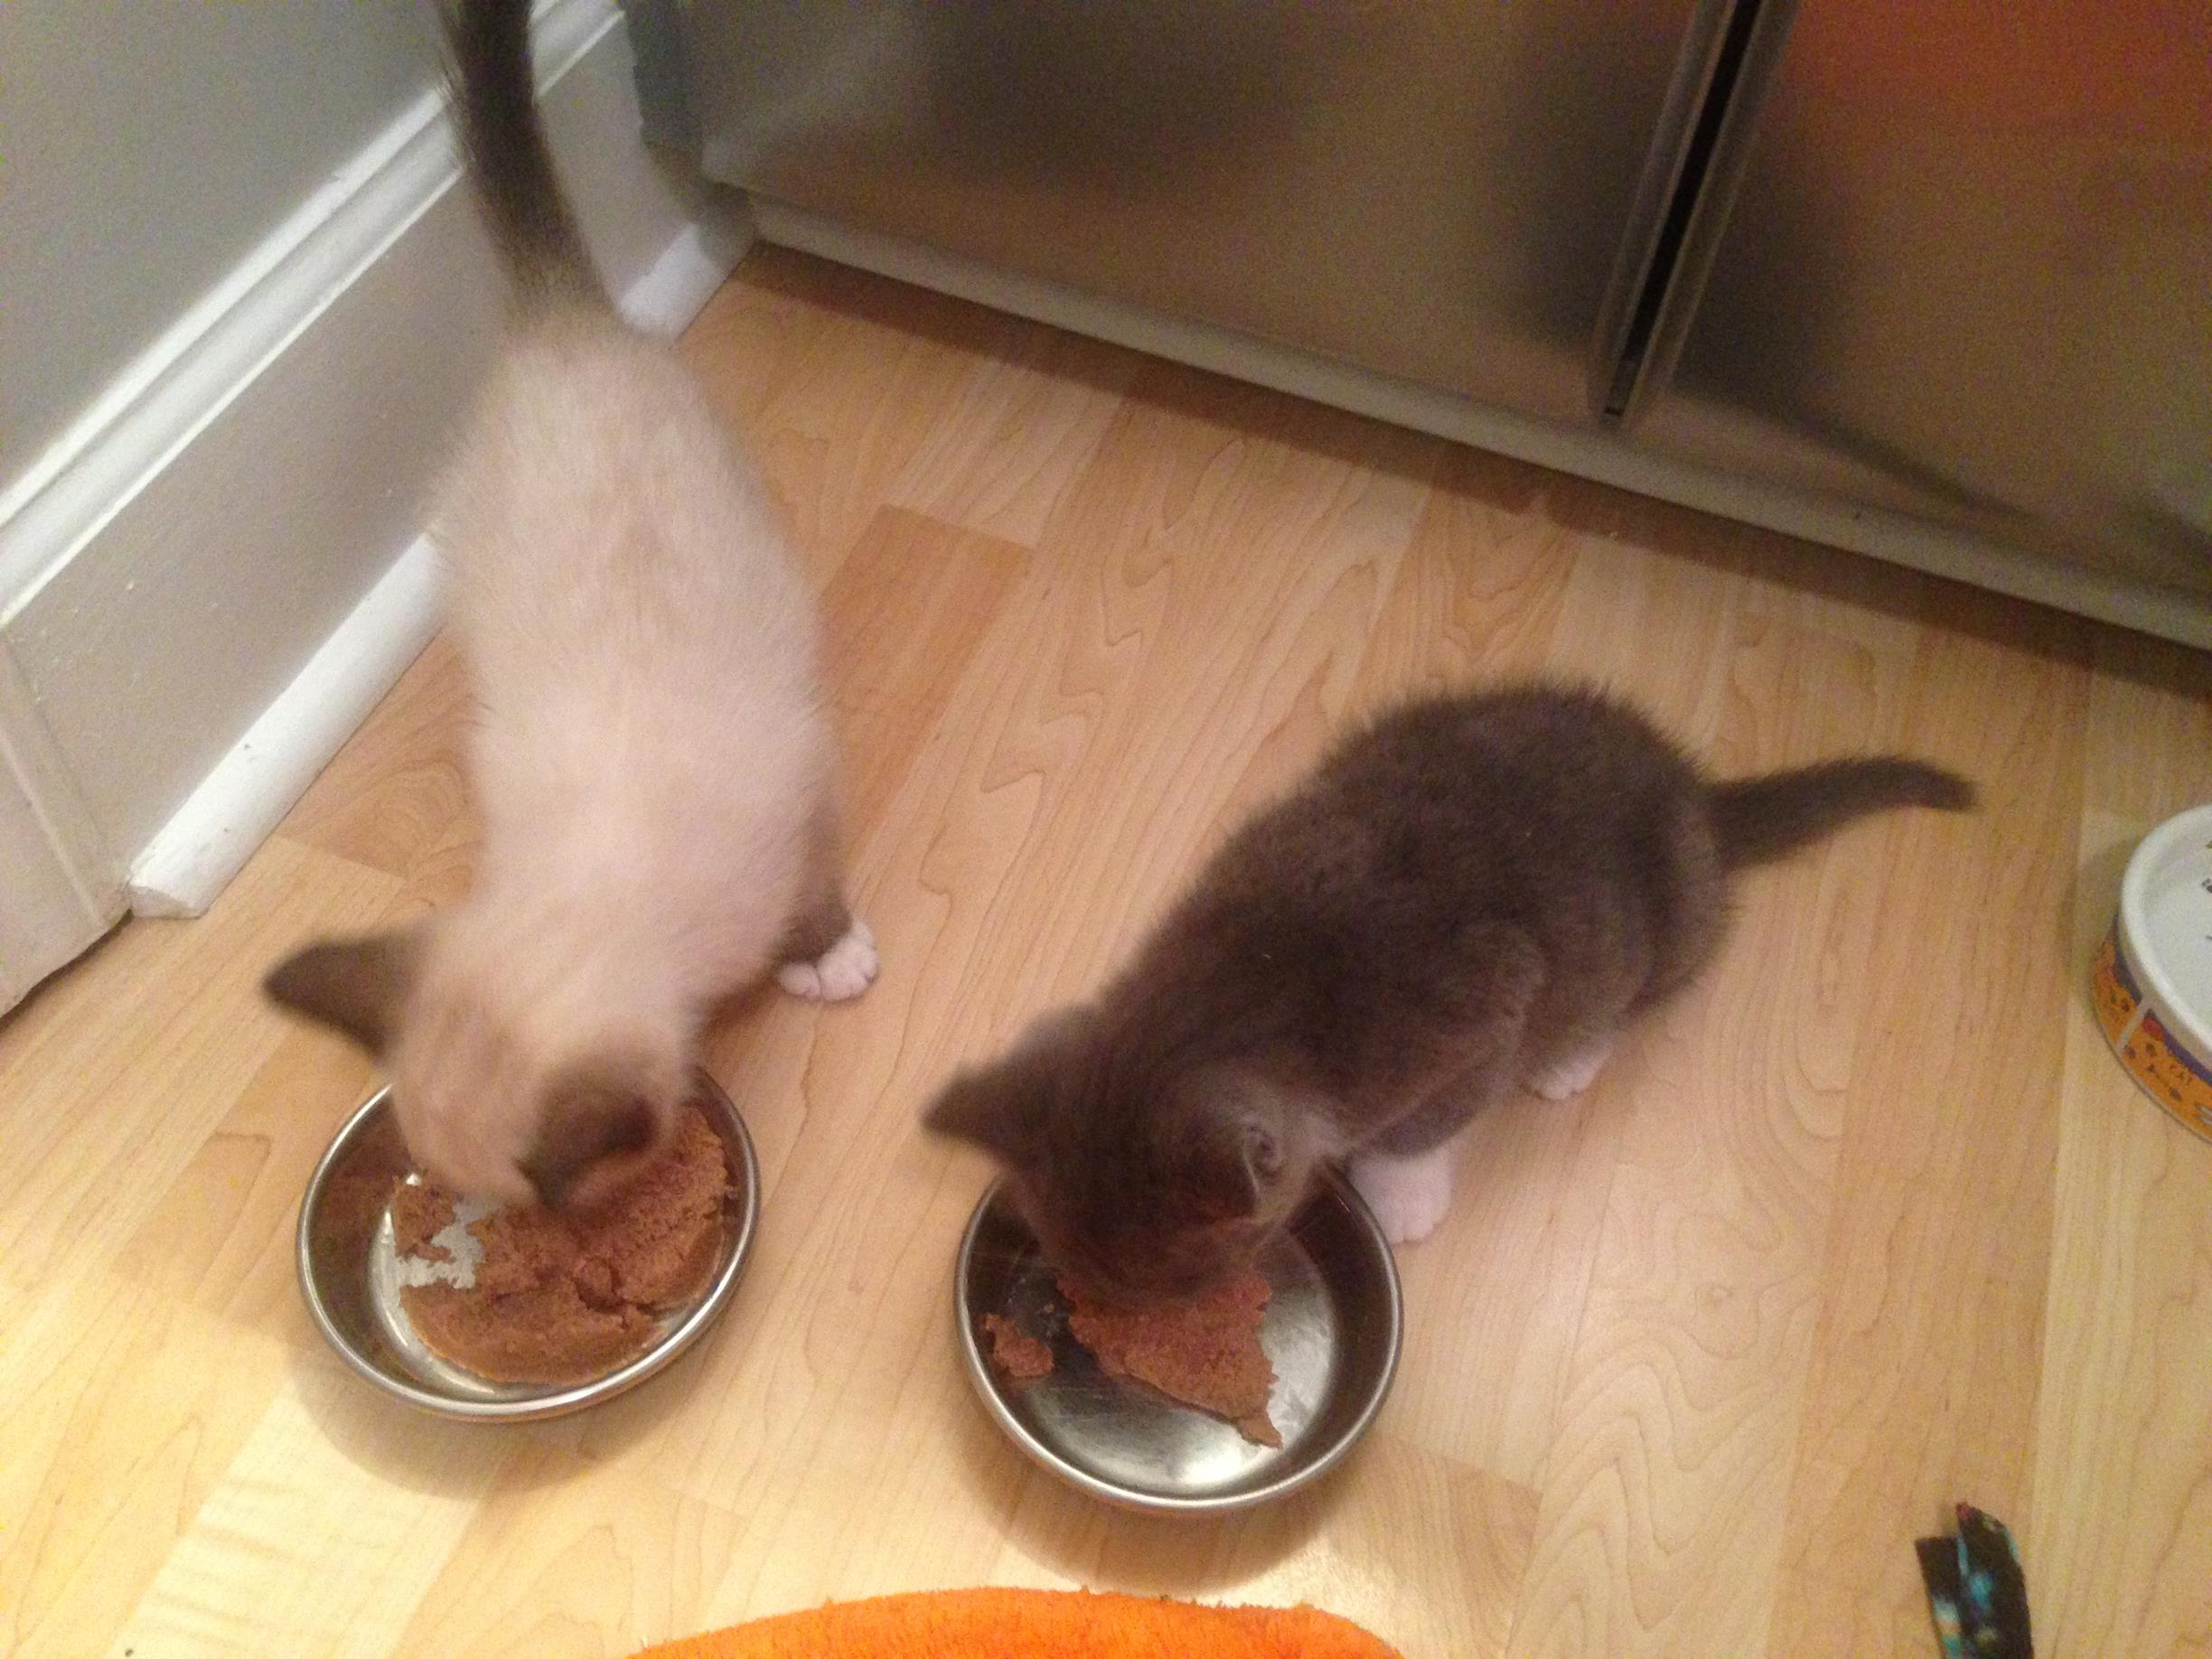 Eventually they are able to eat side by side.